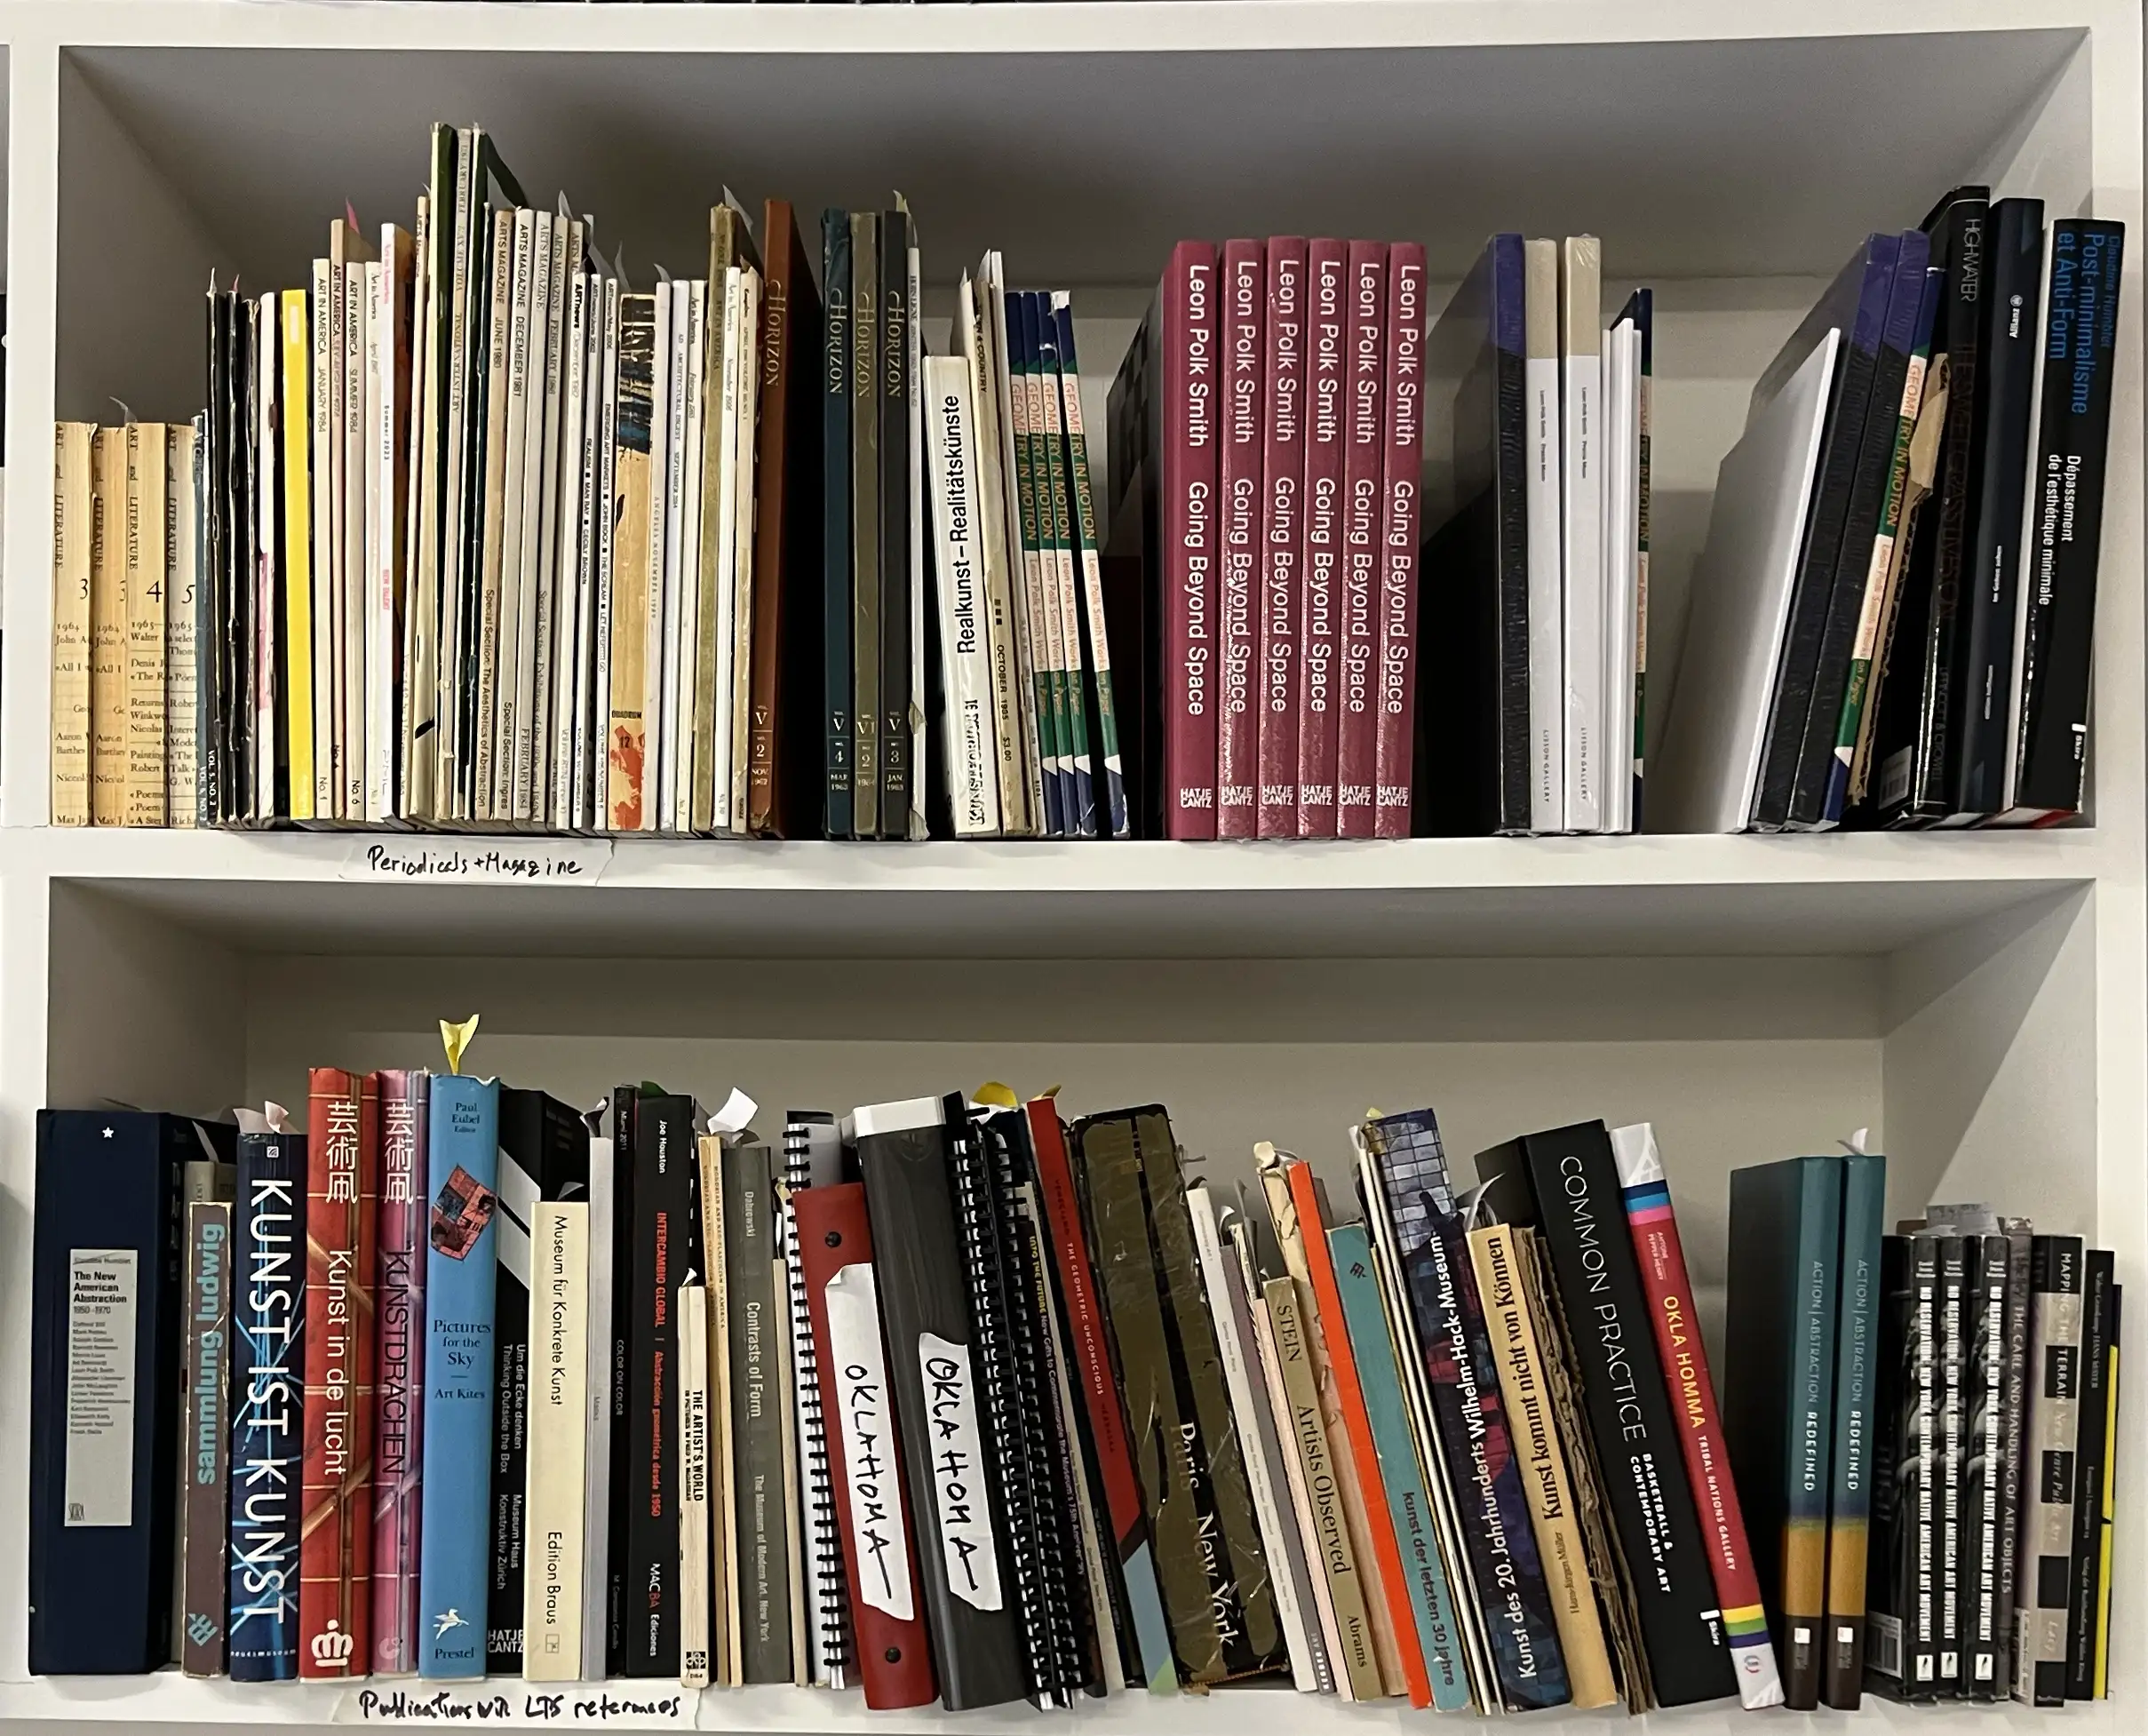 Many books on a shelf from Leon Polk Smith's library